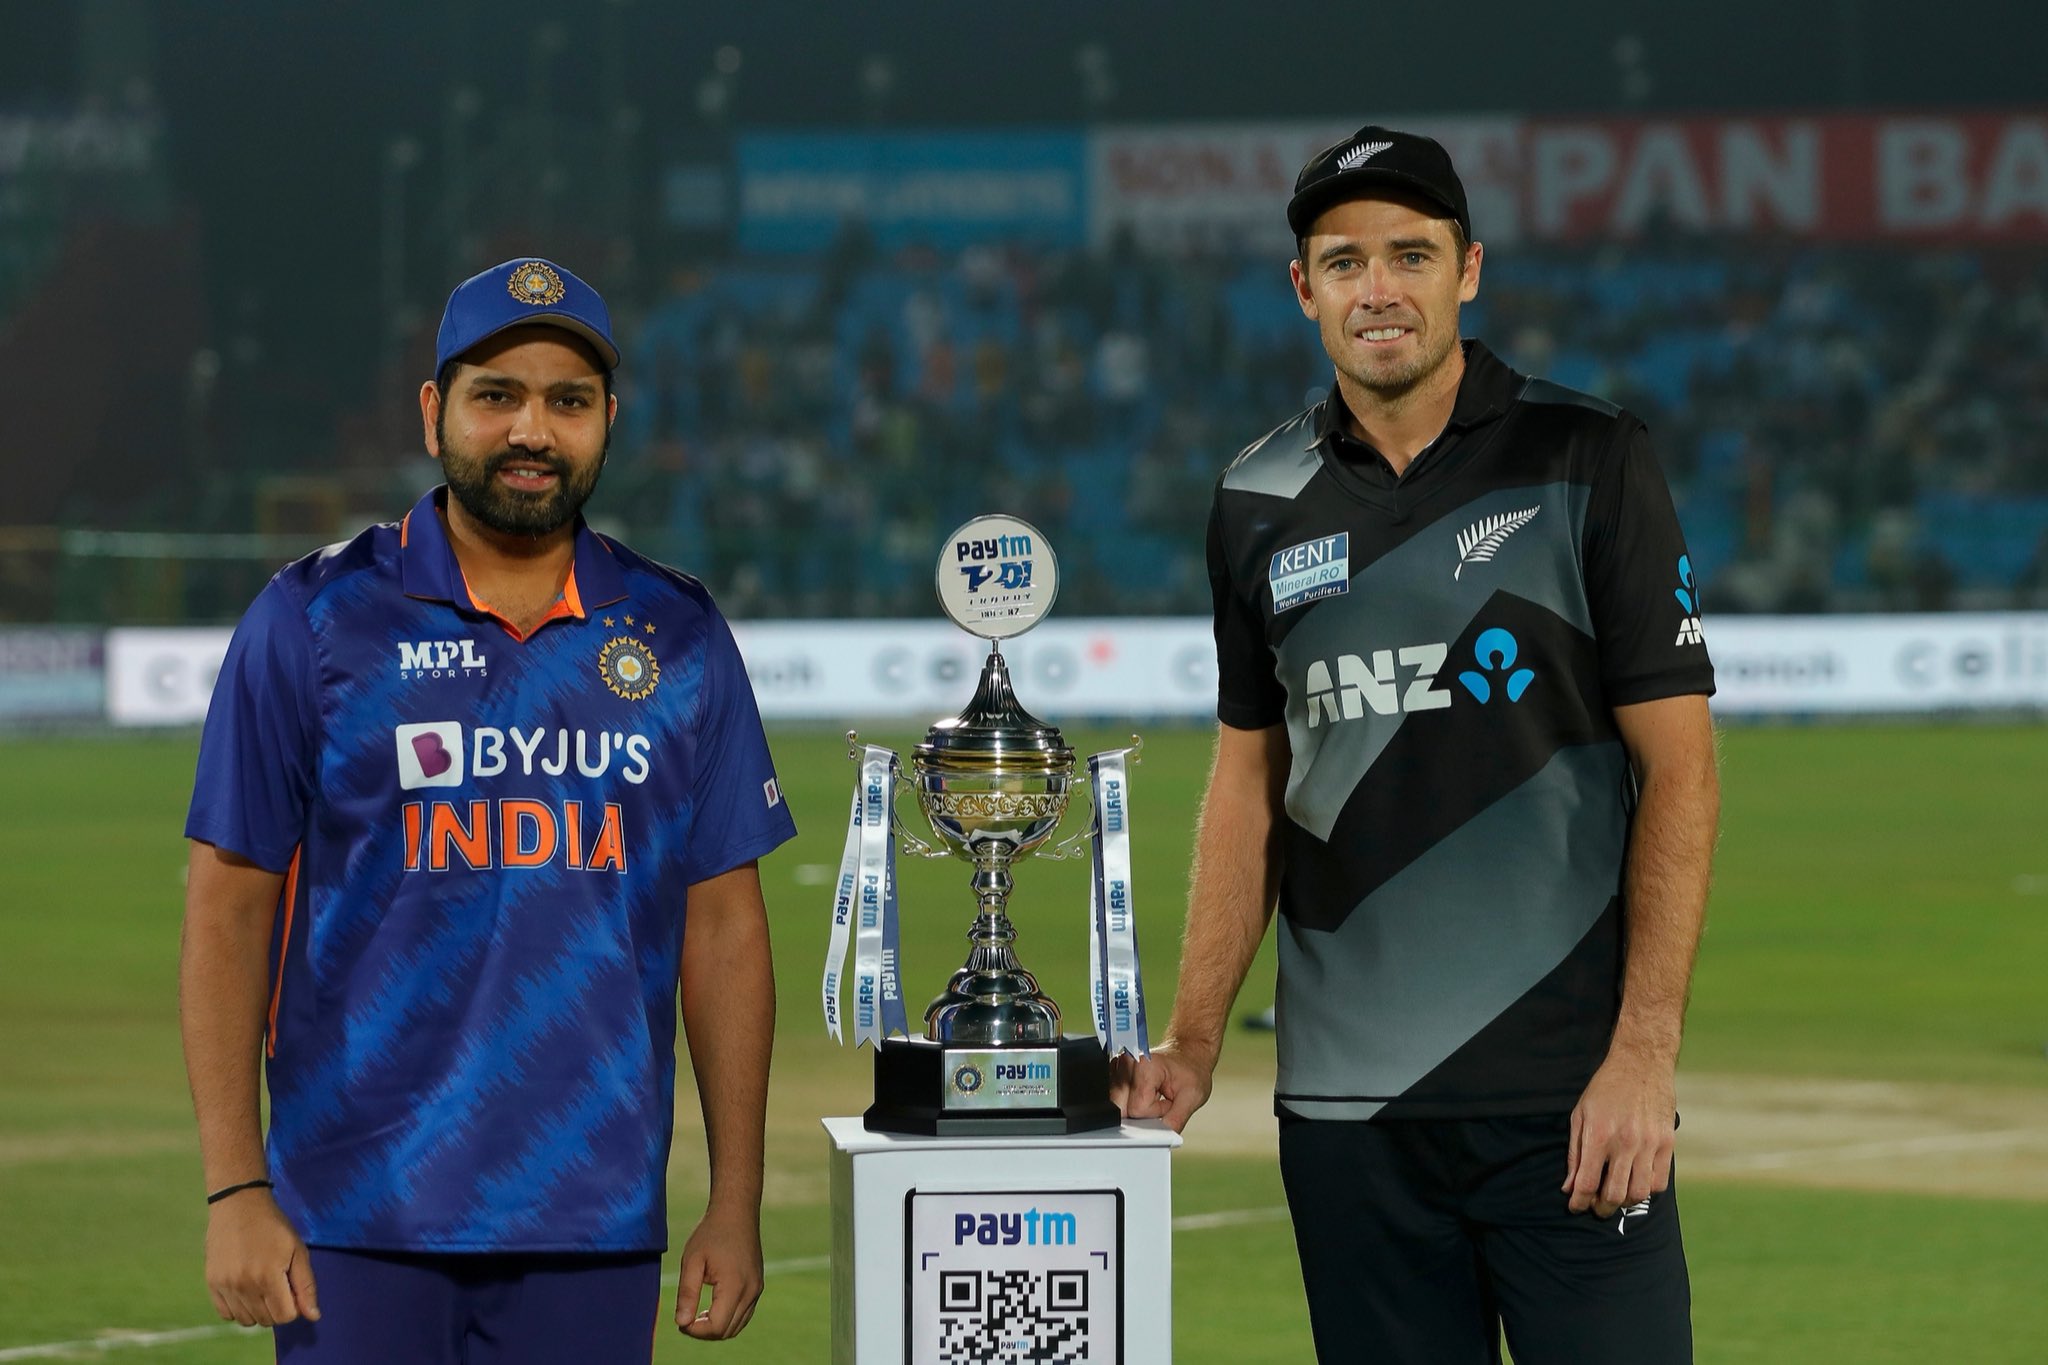 IND vs NZ | We didn’t start with the ball but clawed back in the middle and took it deep till the end, says Tim Southee